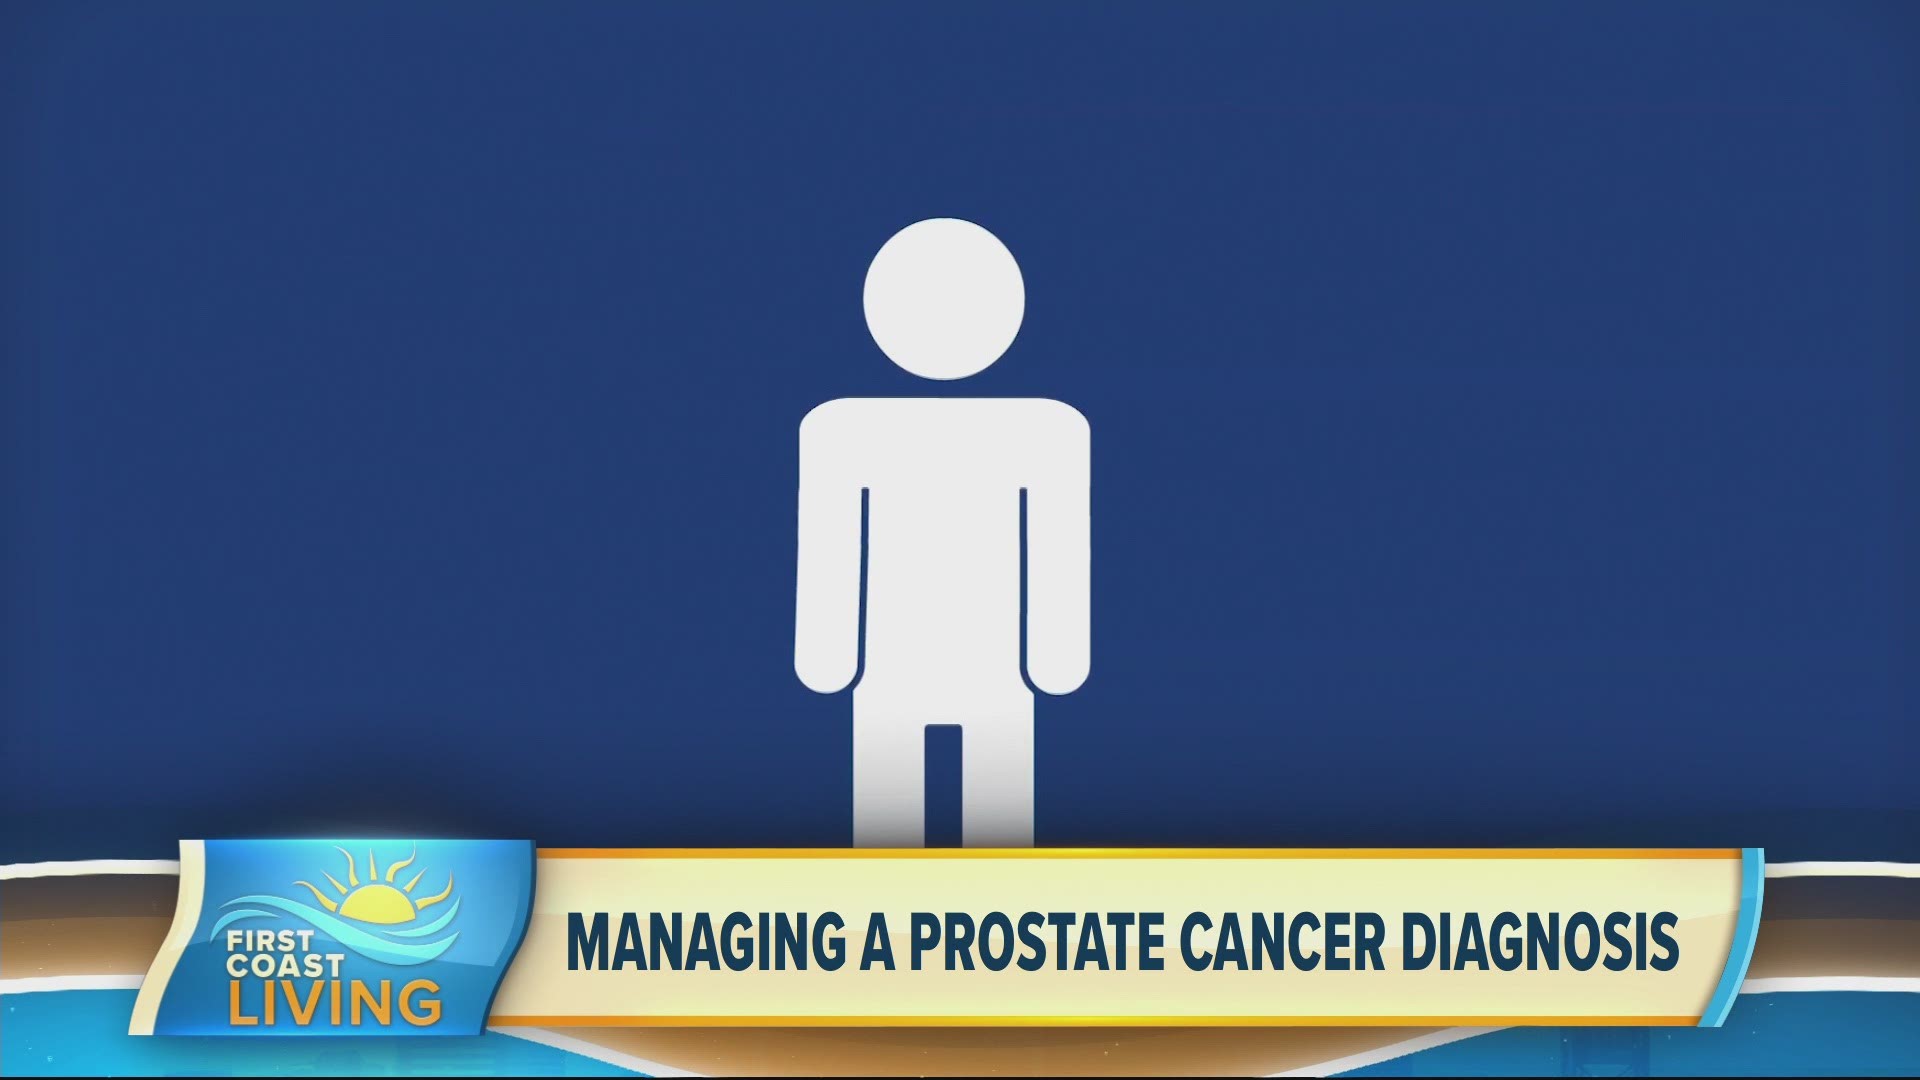 Doctors say Prostate Cancer is the most common non-skin cancer in American men.